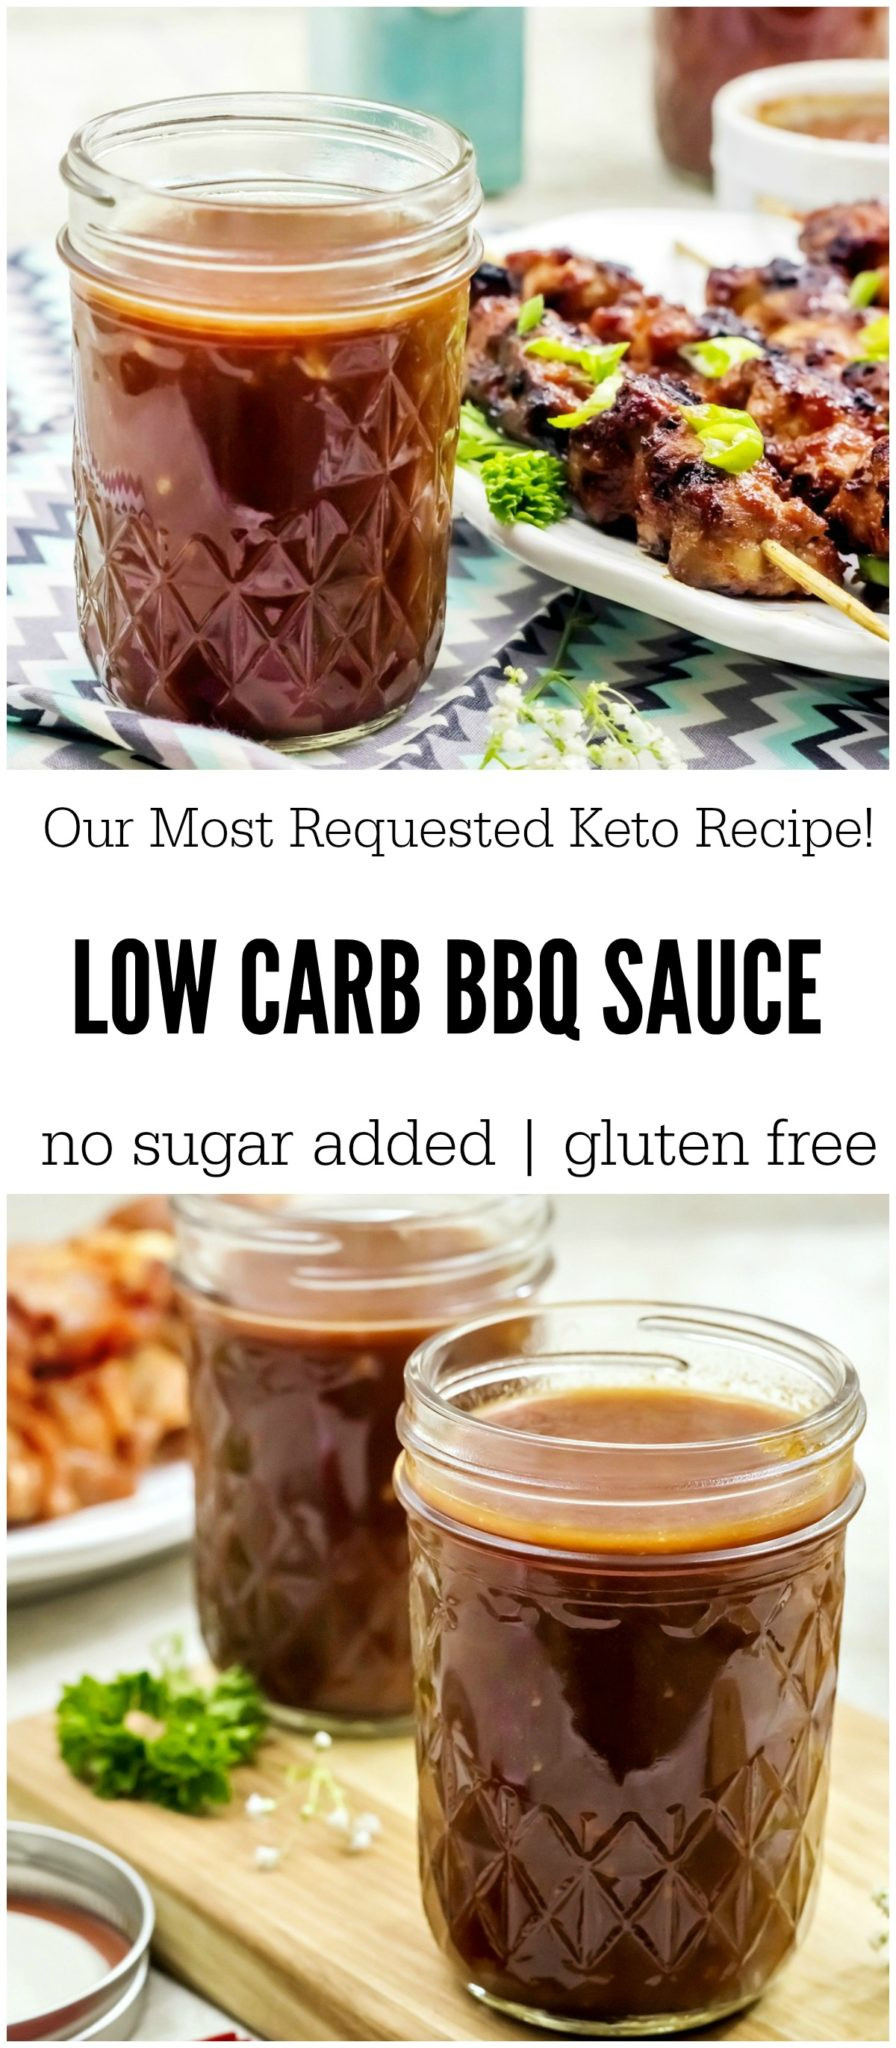 Keto Friendly Bbq Sauce
 Low Carb BBQ Sauce Our Most Requested Keto Friendly Recipe